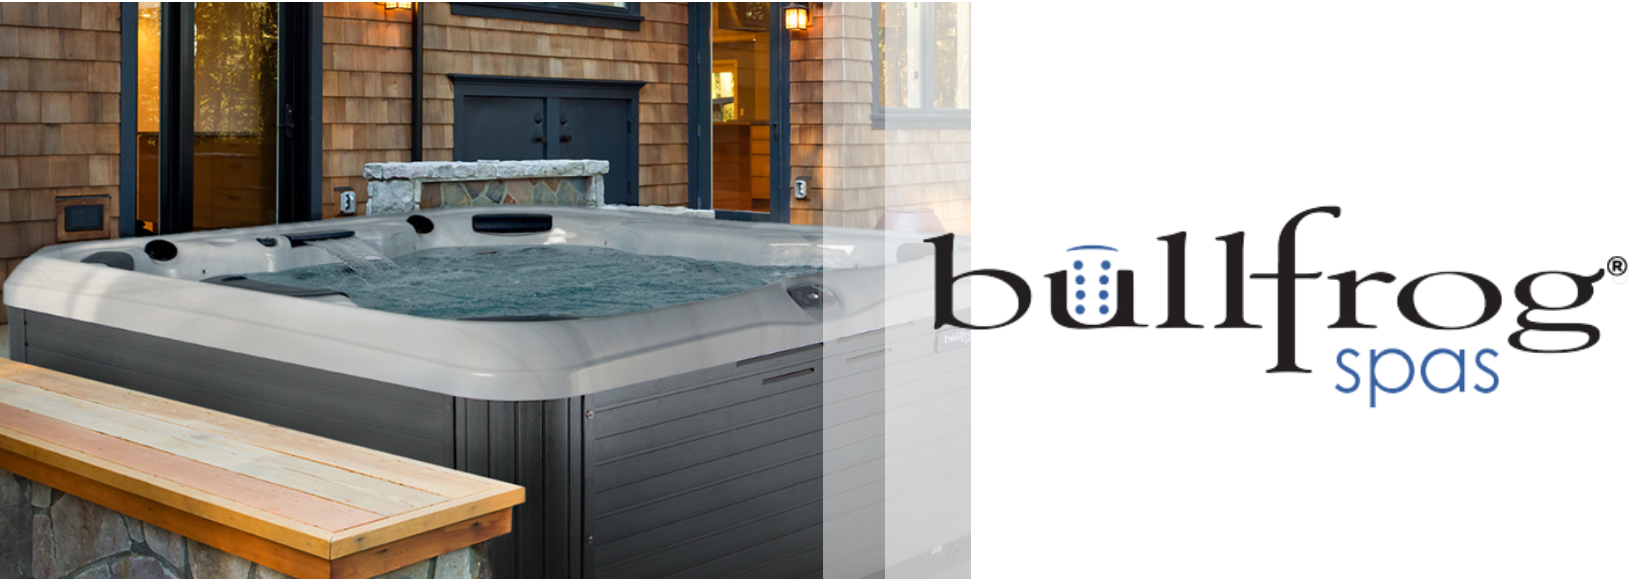 Bullfrog spas products page direct